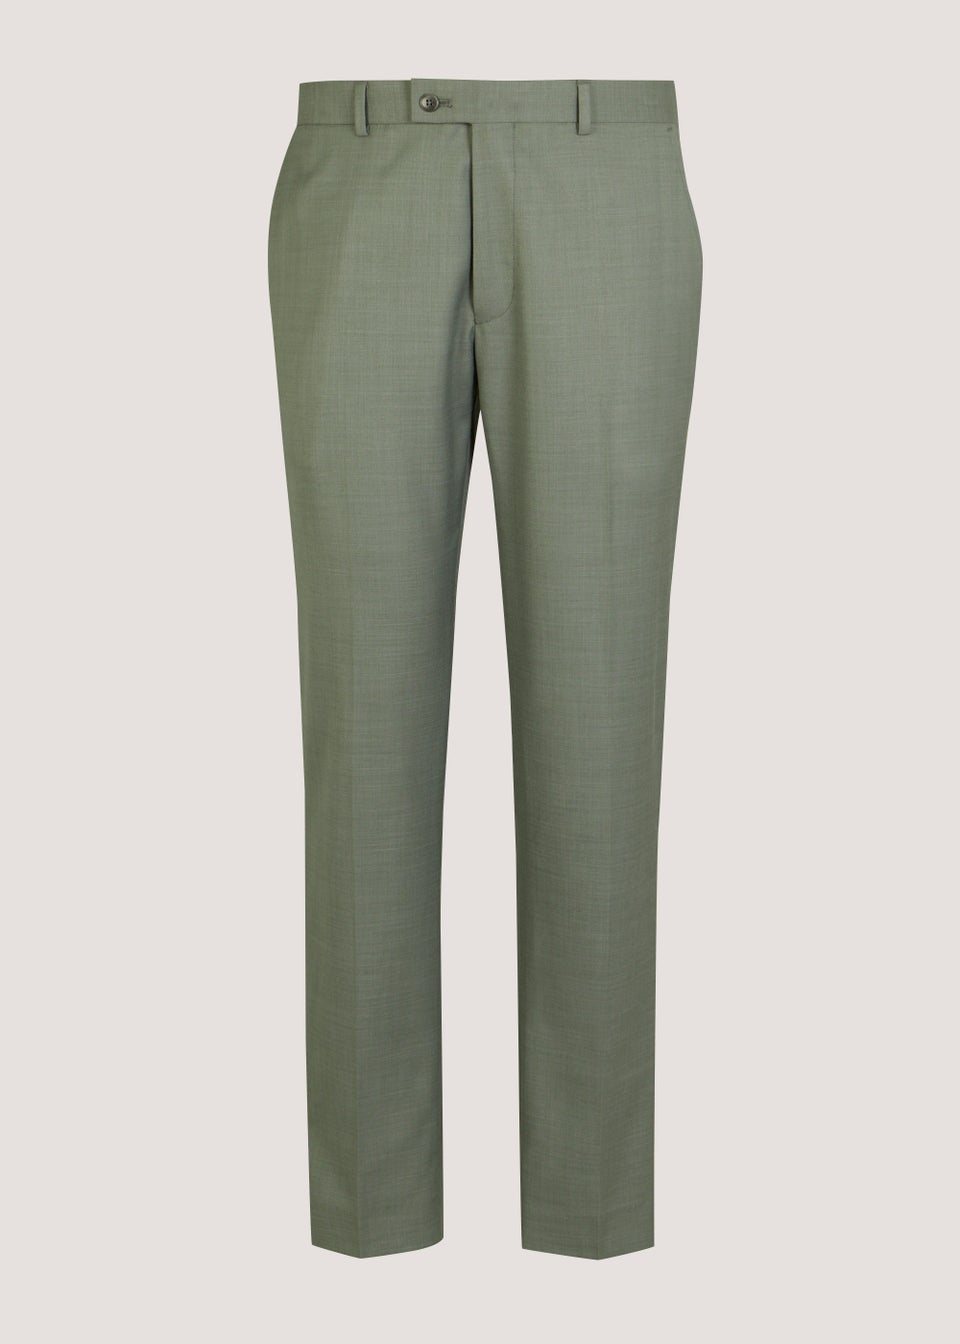 Taylor & Wright Eastwood Olive Slim Fit Suit Trousers - Matalan